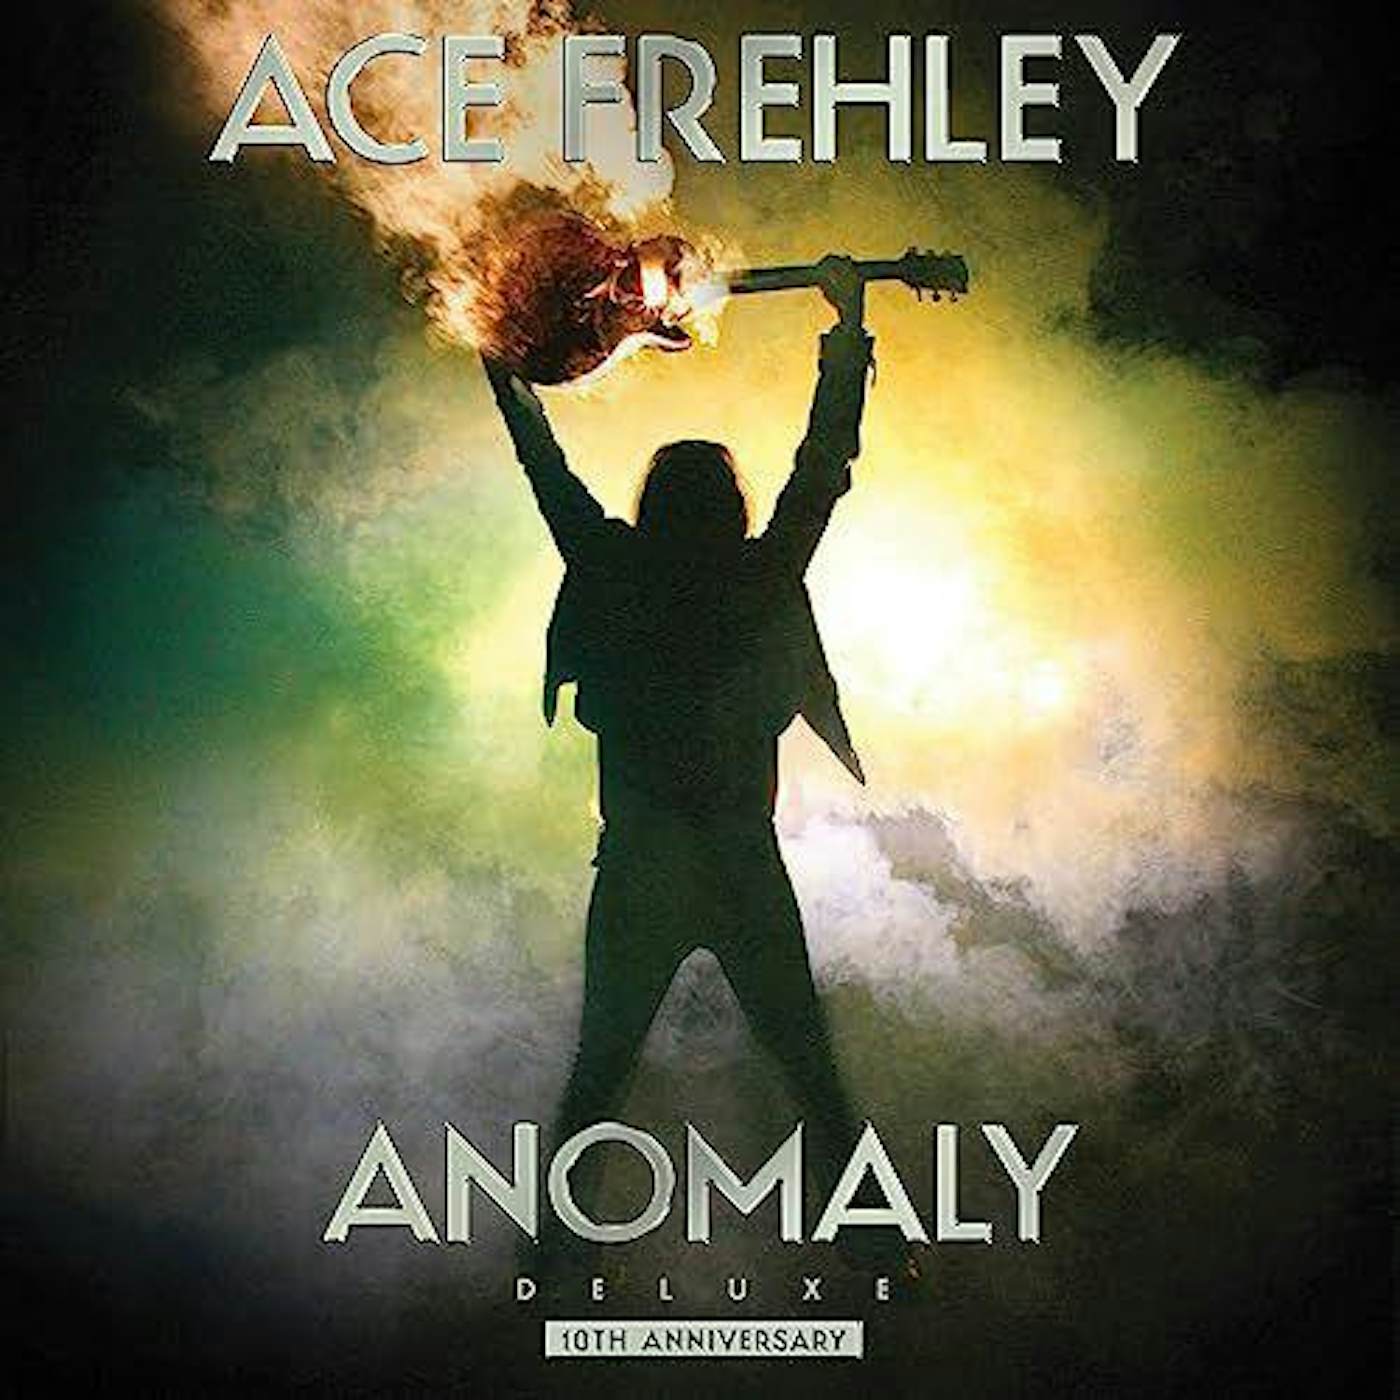 Ace Frehley Anomaly - Deluxe 10th Anniversary (Silver/Bluejay/Emerald Splatter) Vinyl Record